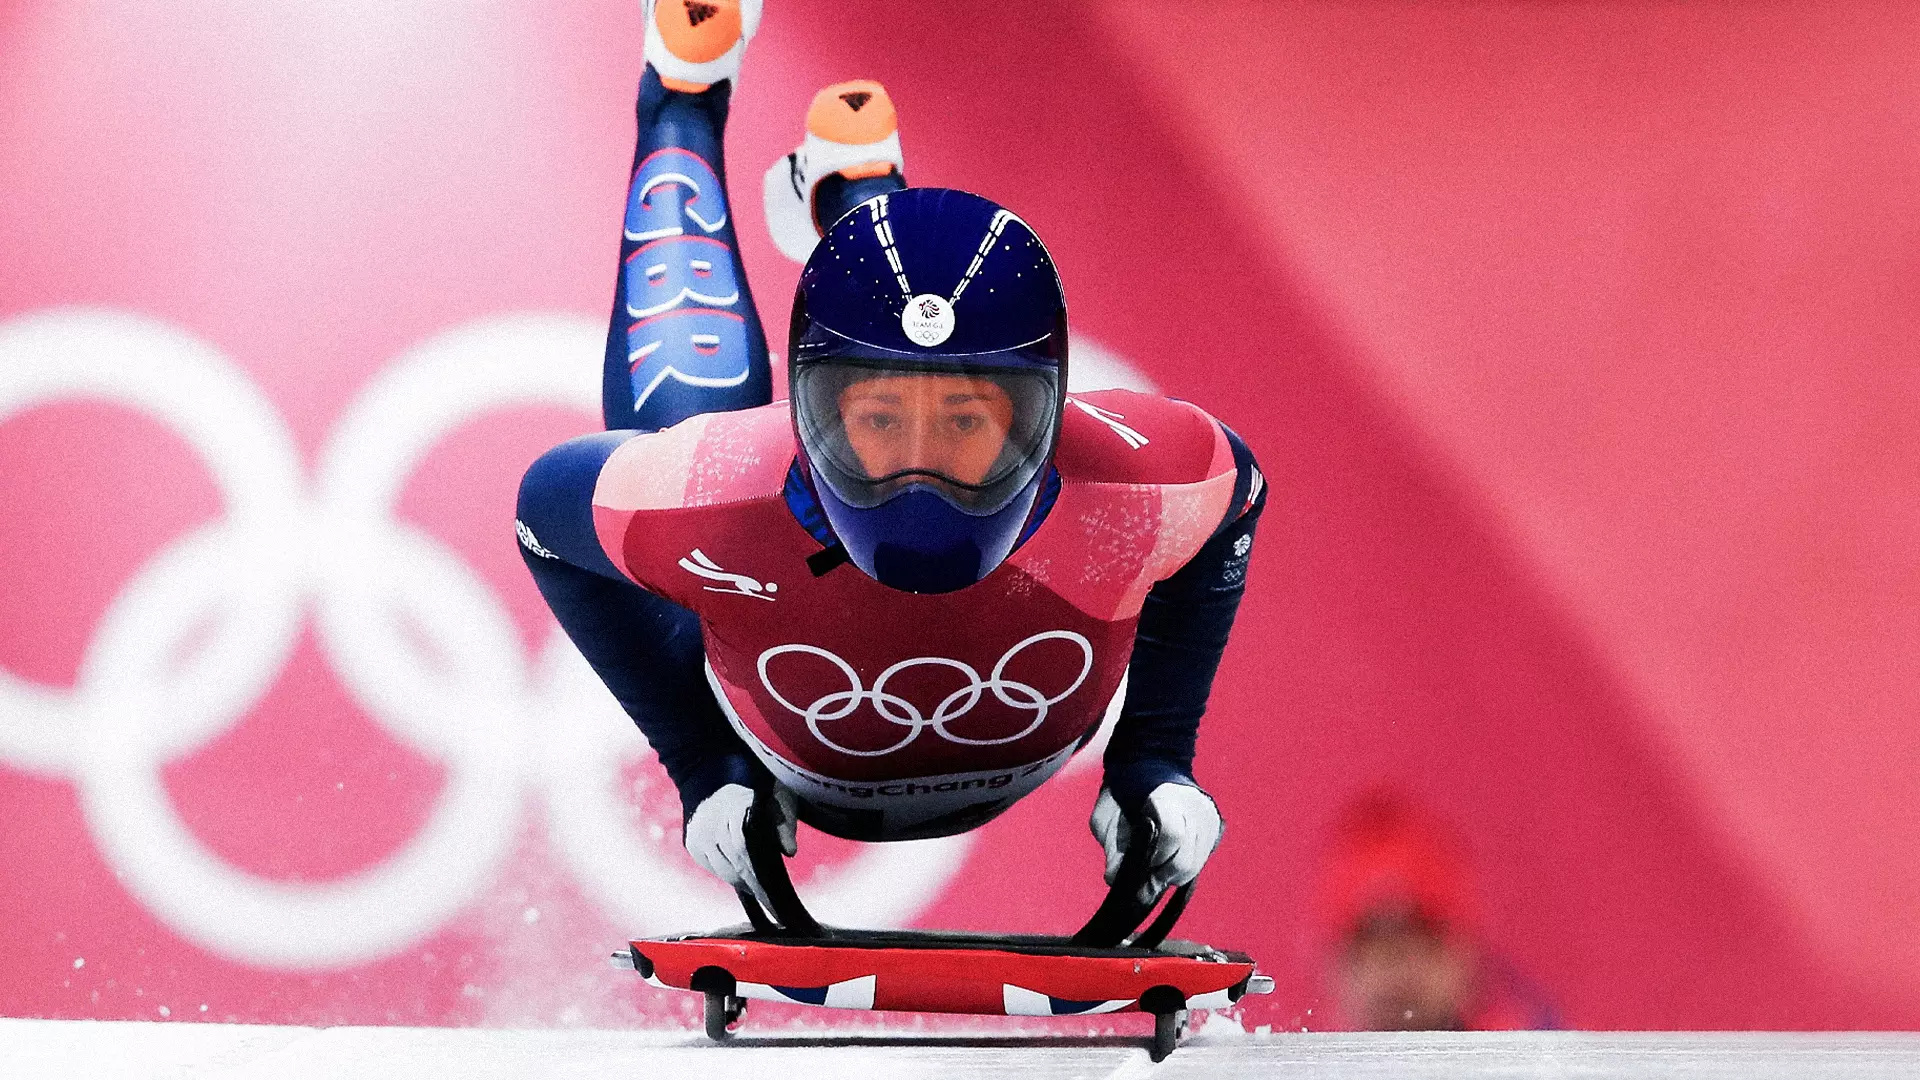 Skeleton (Sport): Lizzy Yarnold, A British former racer, The 2014 Sochi Winter Olympics champion. 1920x1080 Full HD Background.